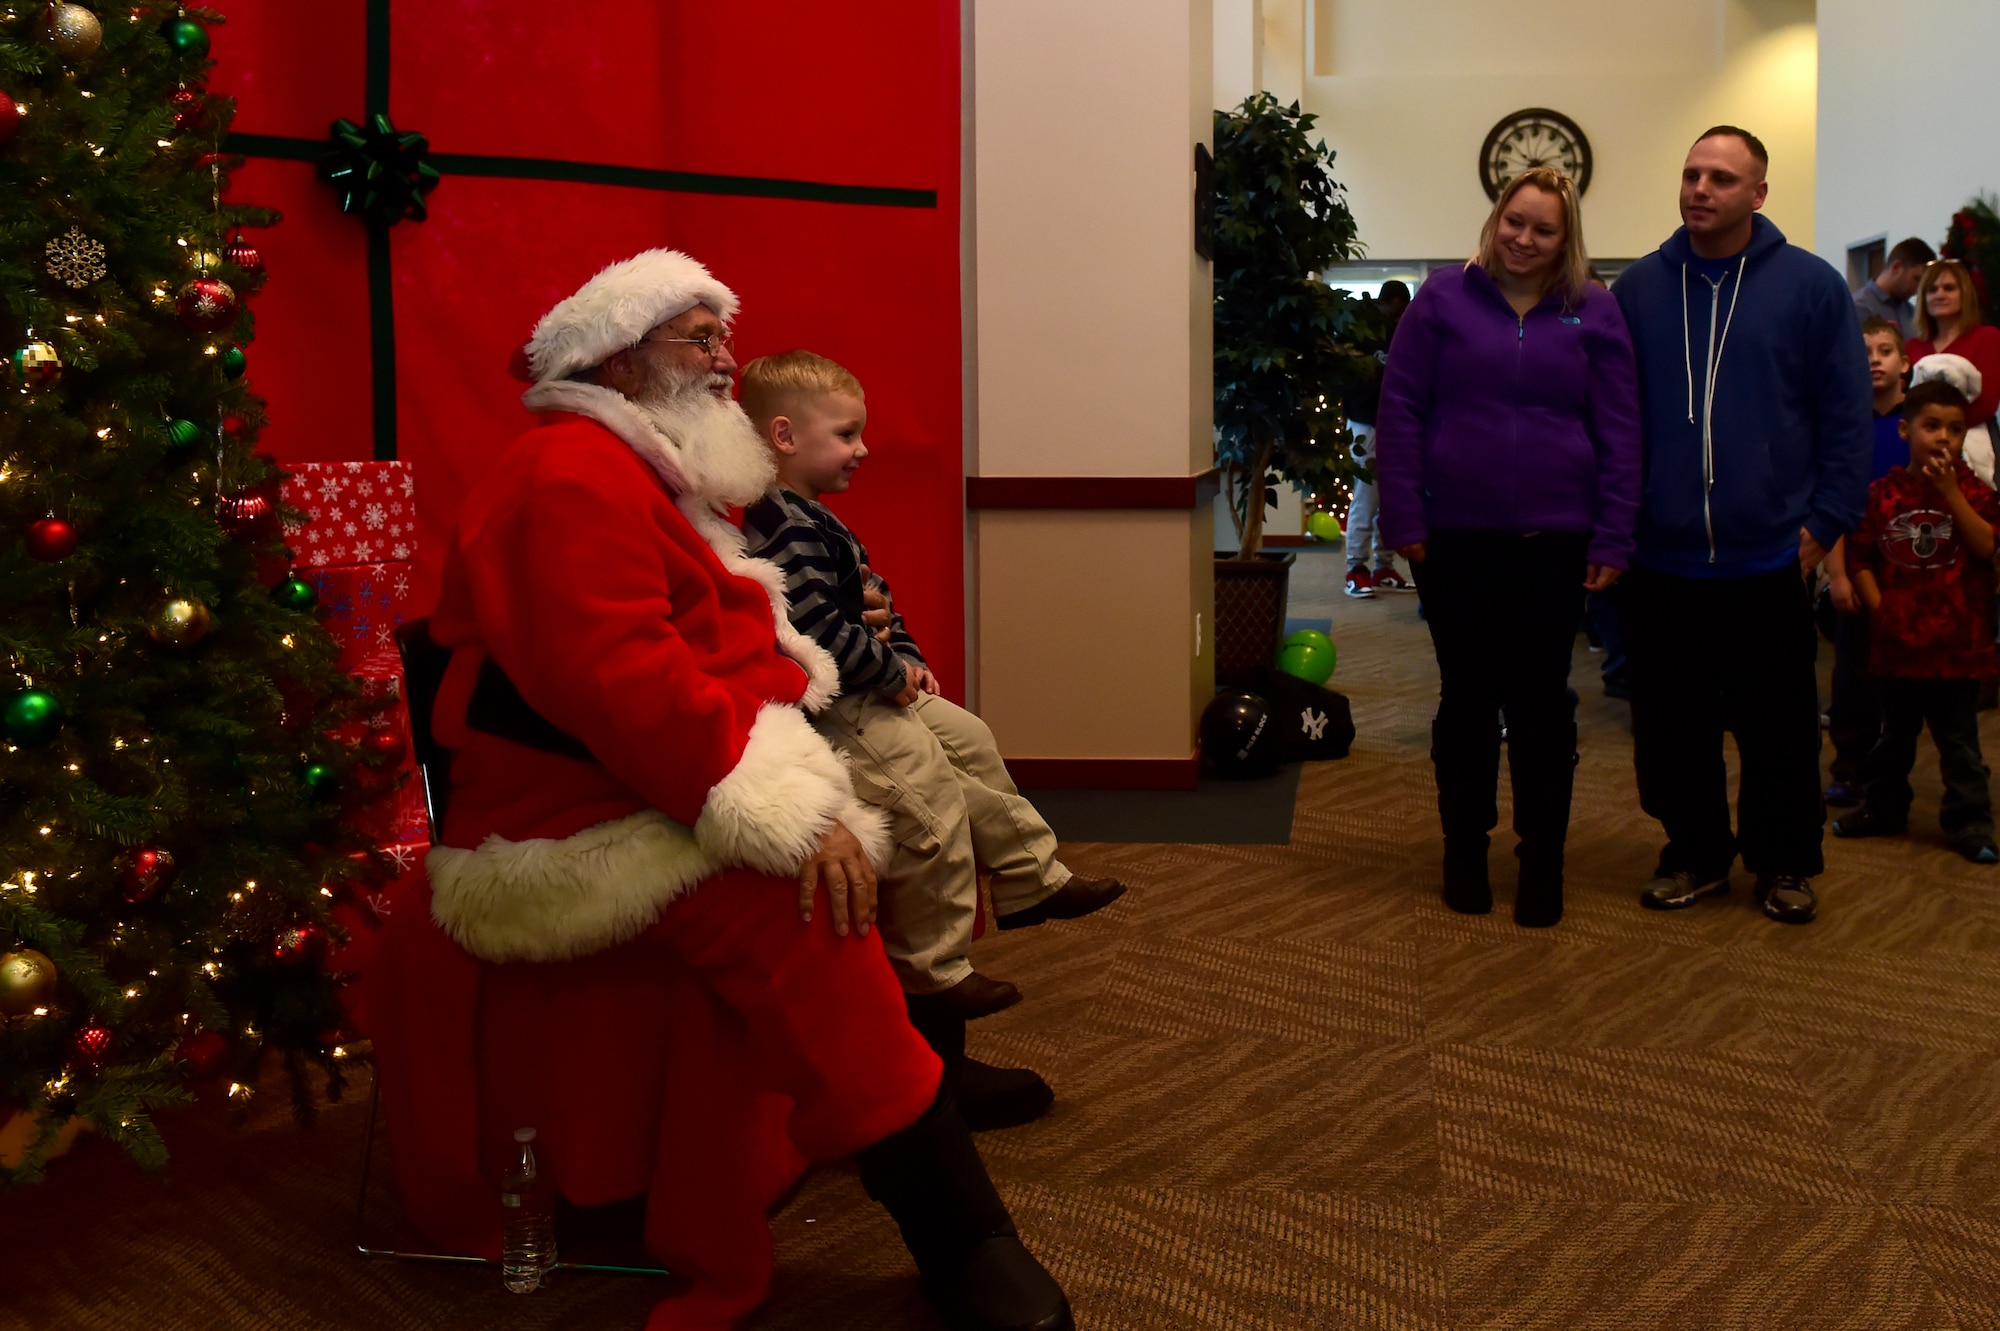 - A Team Buckley child gets his photo taken with Santa Claus during Breakfast with Santa at the Leadership Development Center Dec. 12, 2015, on Buckley Air Force Base, Colo. The event provided breakfast, a gift for each child and the opportunity for a picture with Santa Claus. (U.S. Air Force photo by Airman 1st Class Luke Nowakowski/Released)